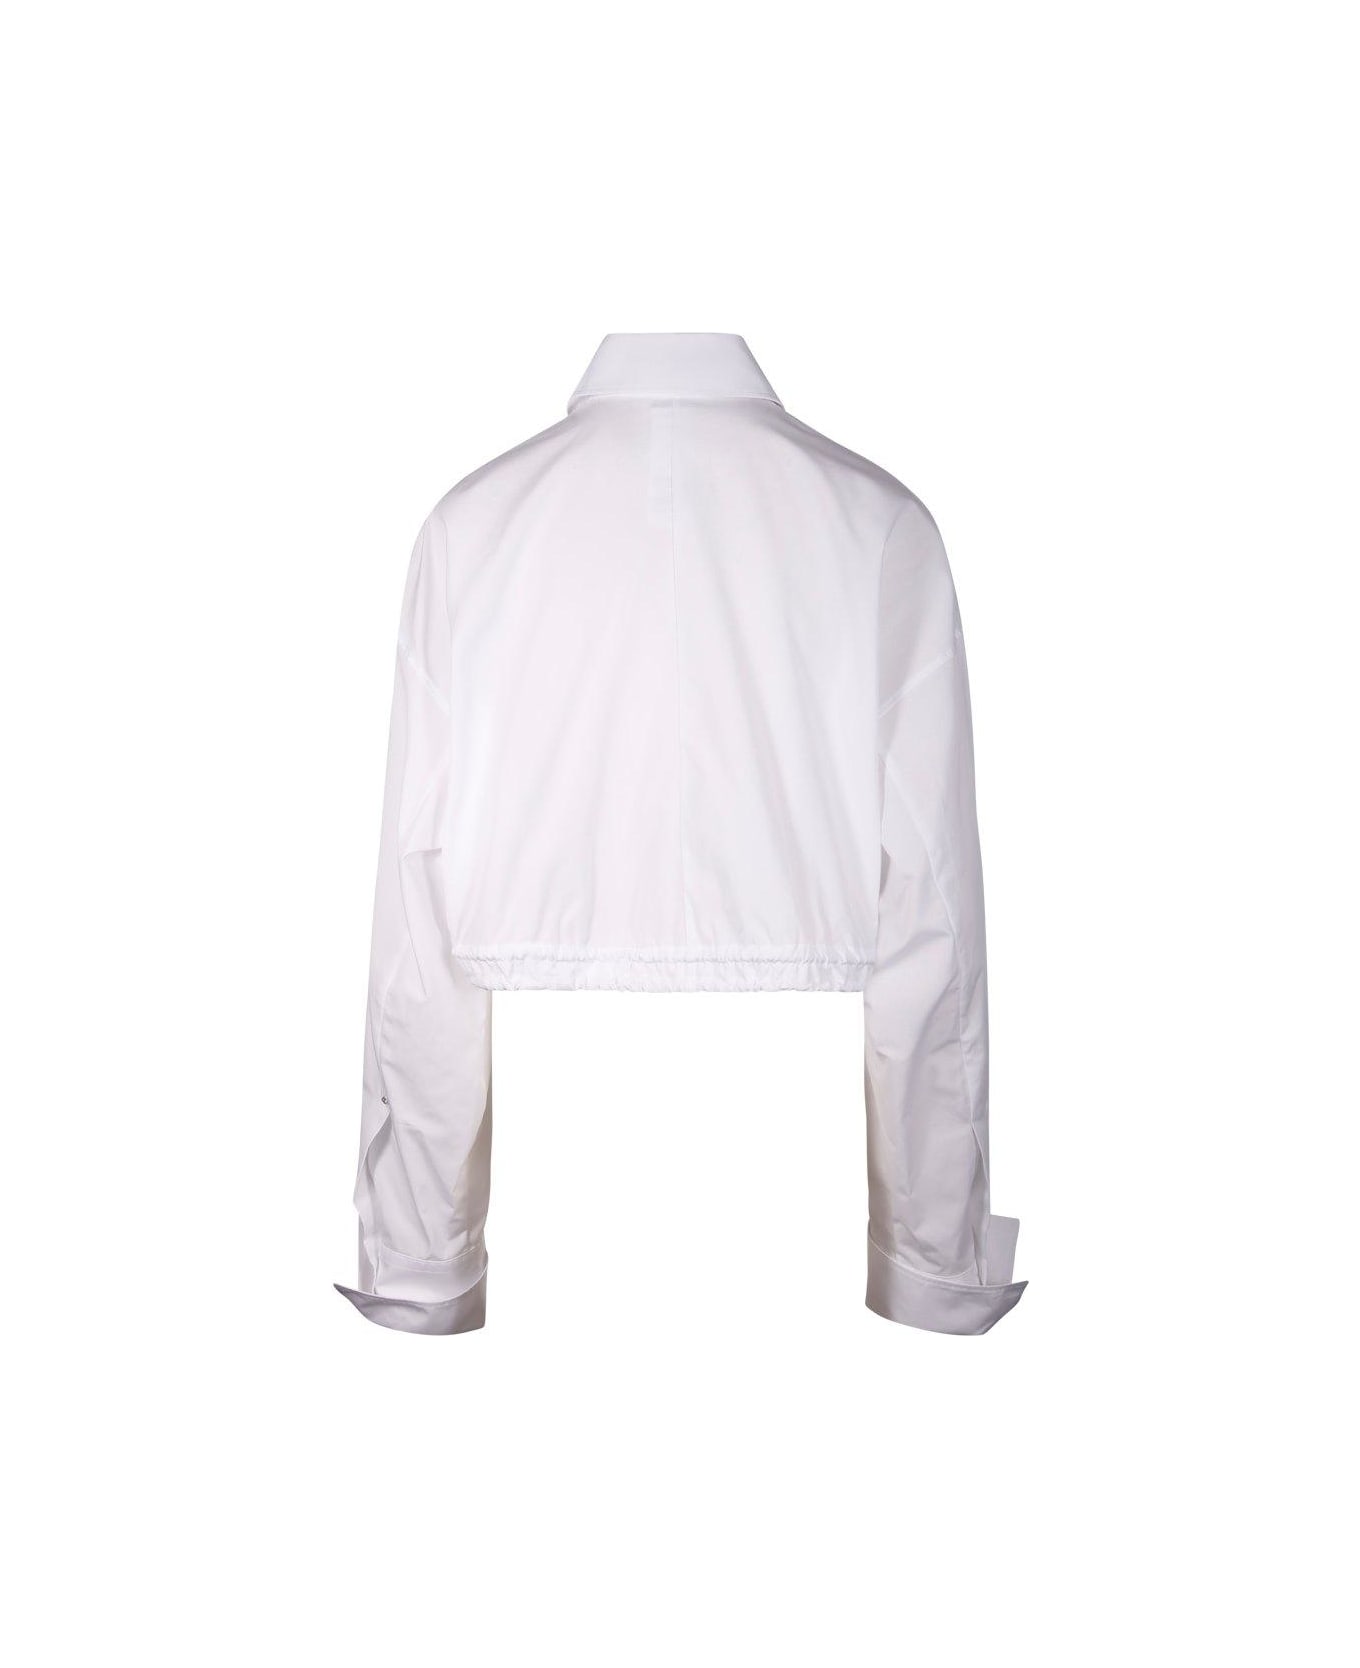 SportMax Buttoned Long-sleeved Cropped Shirt - Bianco ottico シャツ